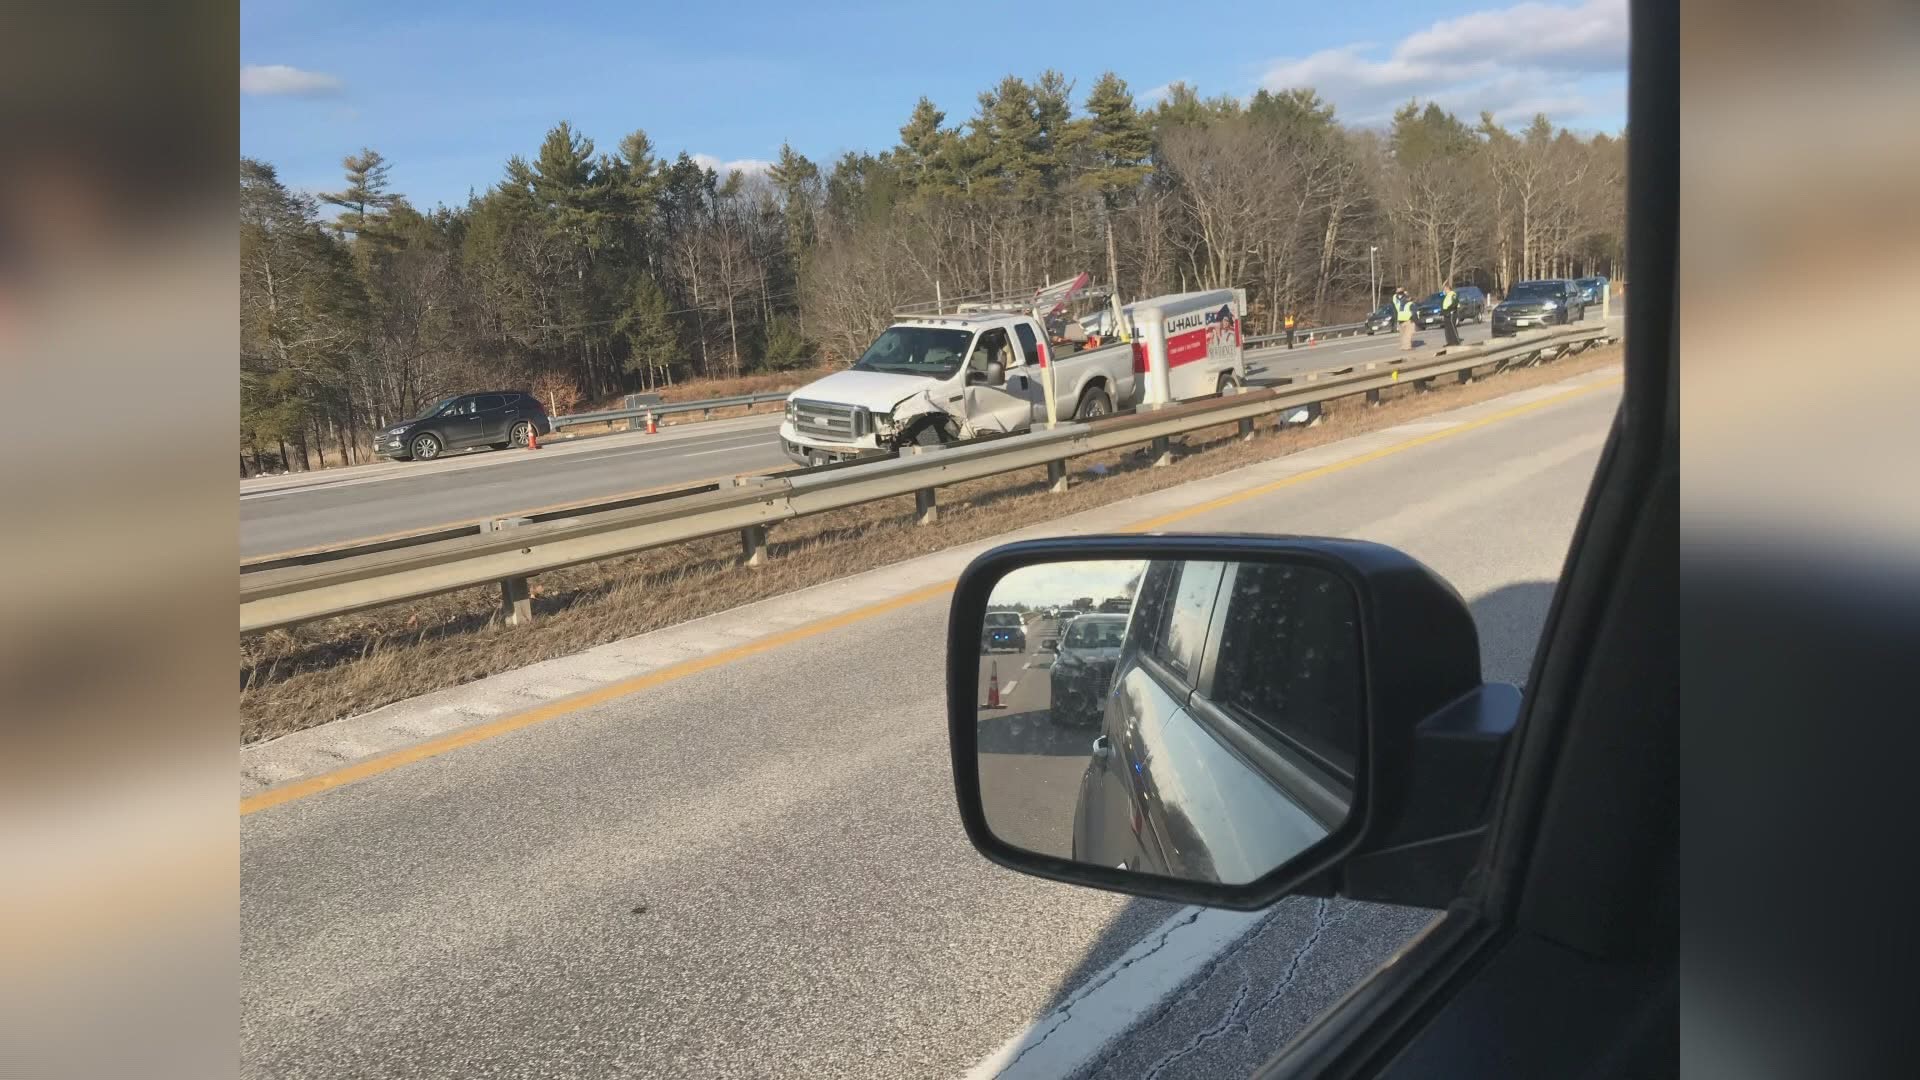 Police chase on Maine Turnpike ends with crash, multiple injuries